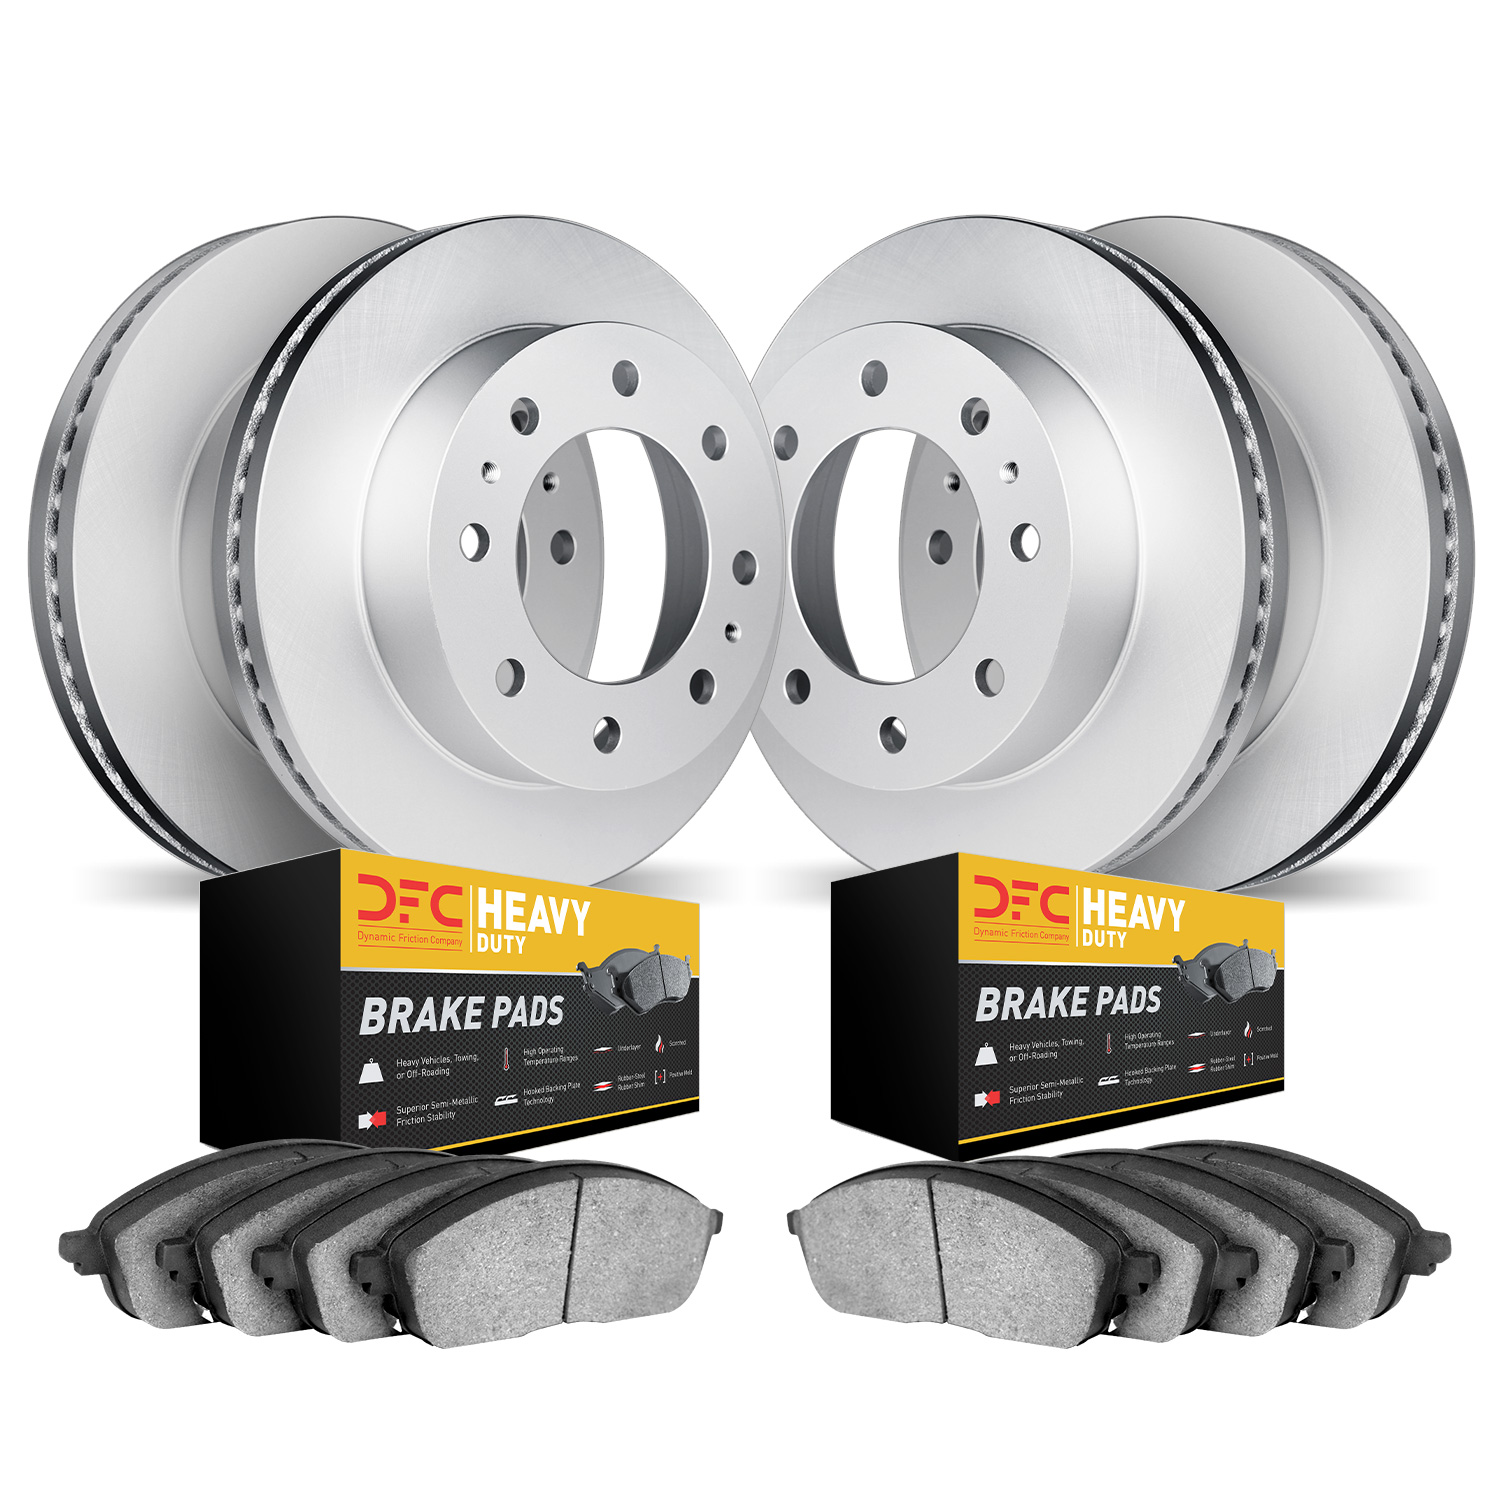 4204-54068 Geospec Brake Rotors w/Heavy-Duty Brake Pads Kit, Fits Select Ford/Lincoln/Mercury/Mazda, Position: Front and Rear